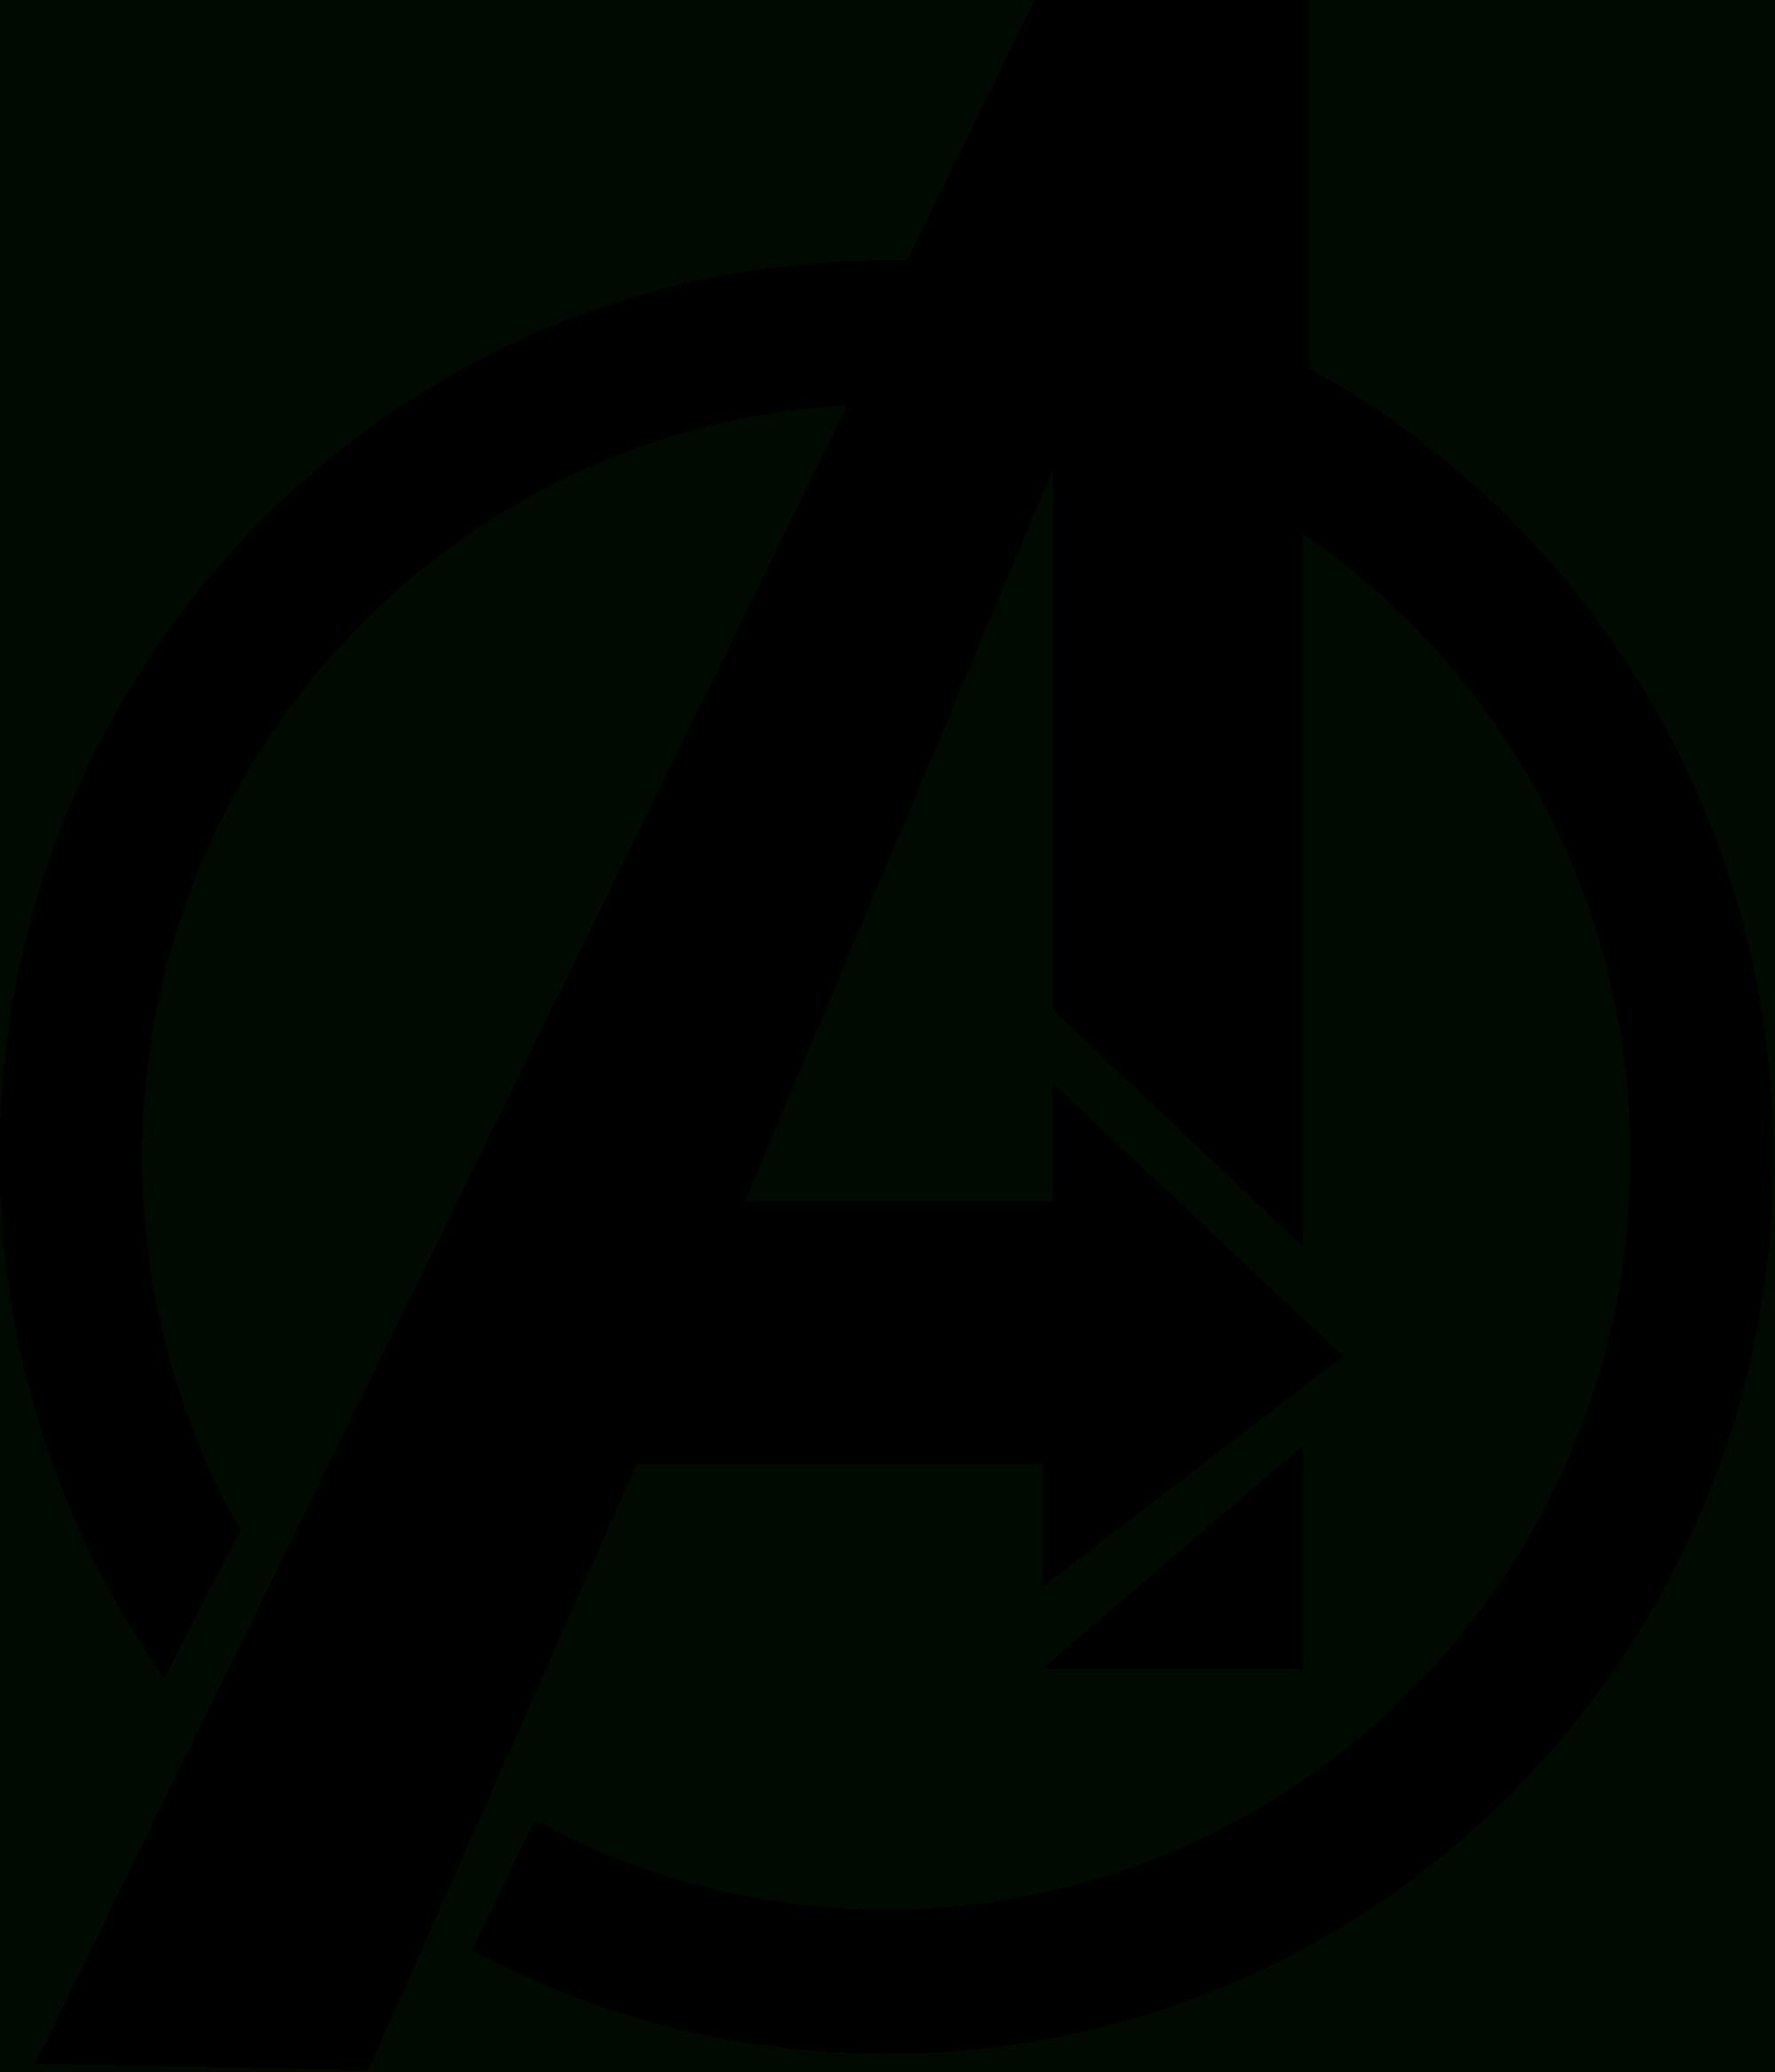 Avengers Symbol Image posted by Christopher Johnson